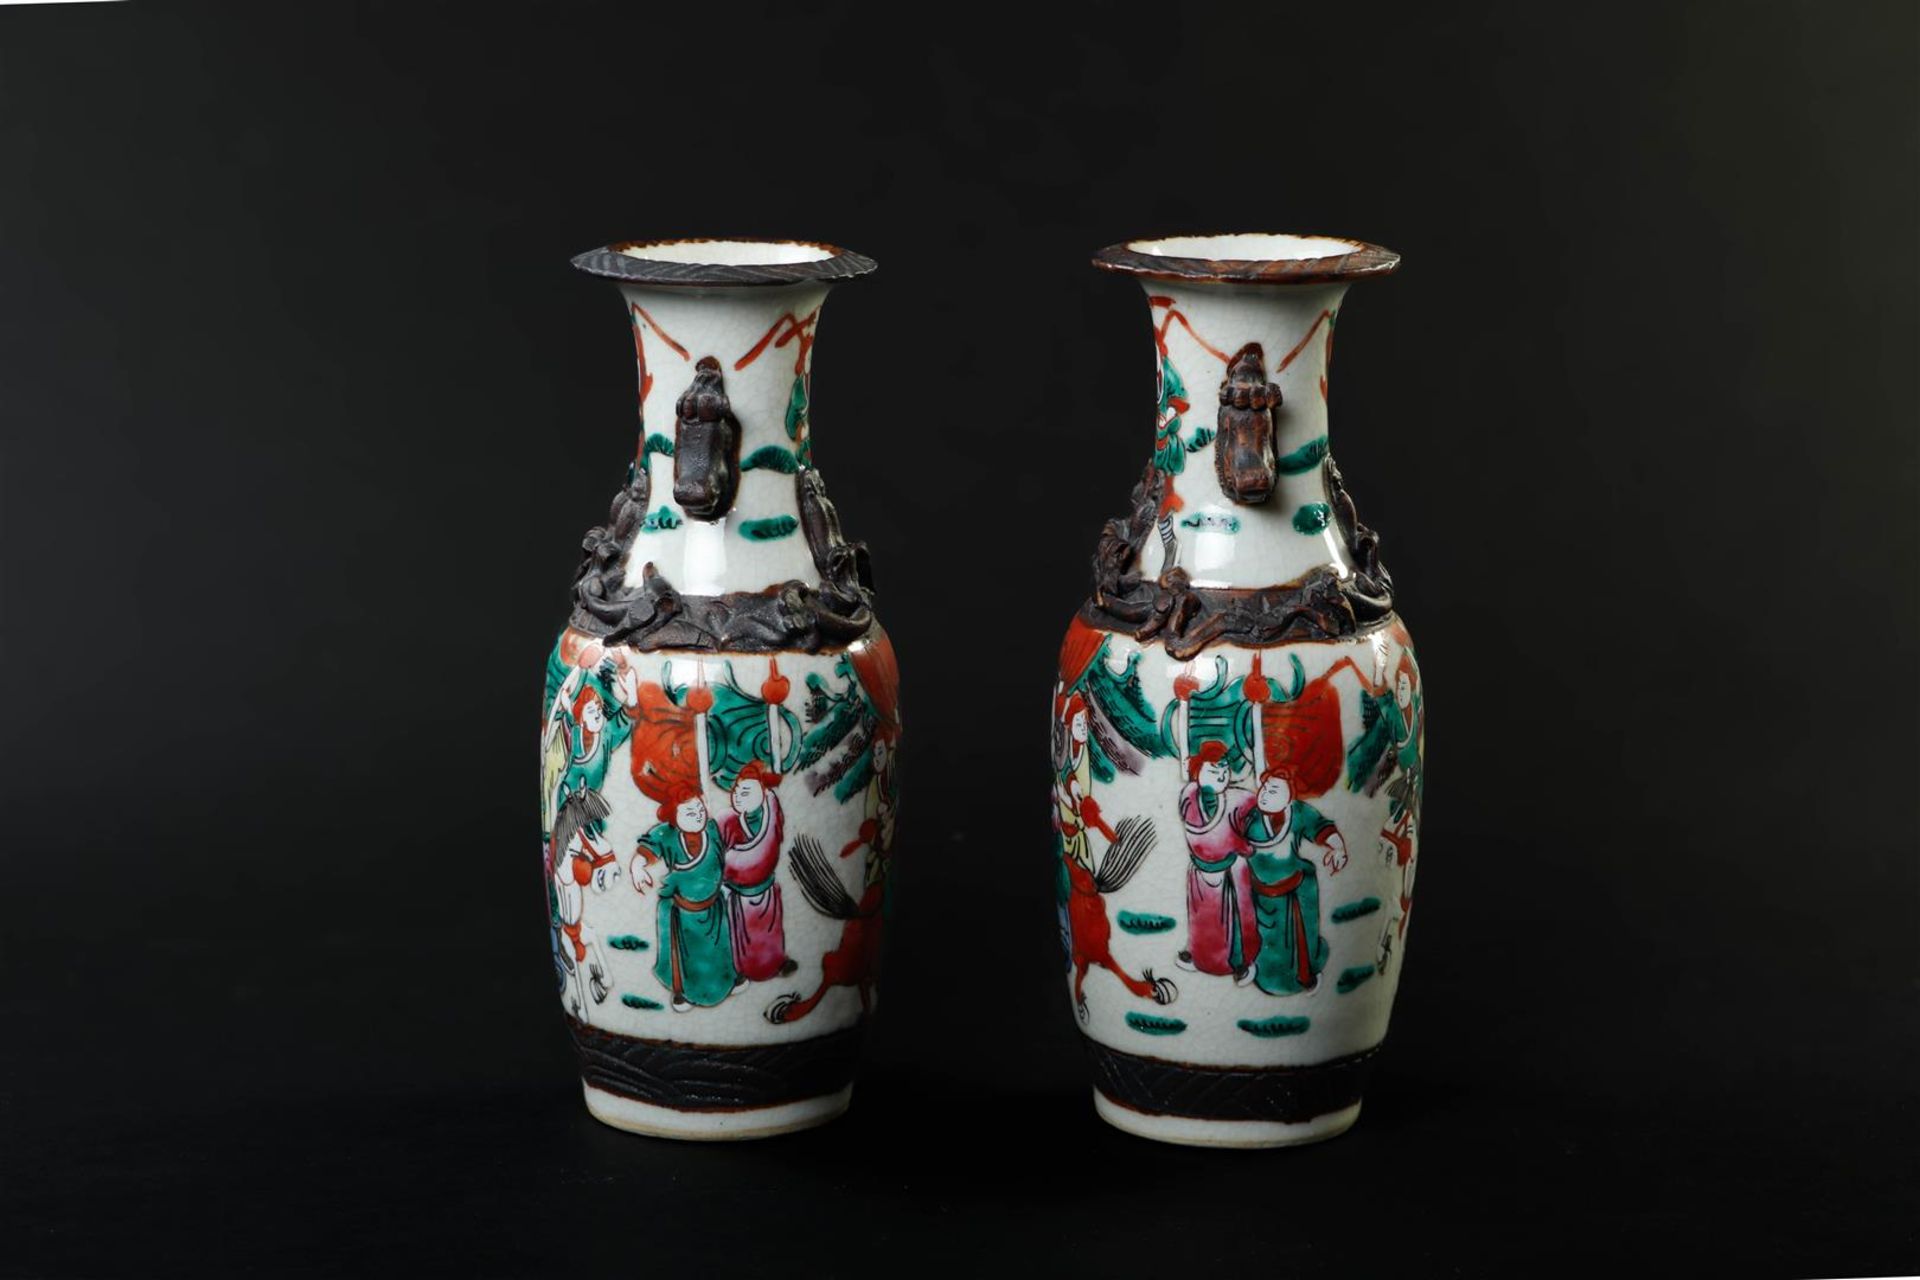 A pair of Nanking earthenware vases decorated with various figures. China, 19th century.
H. 25 cm. - Image 4 of 6